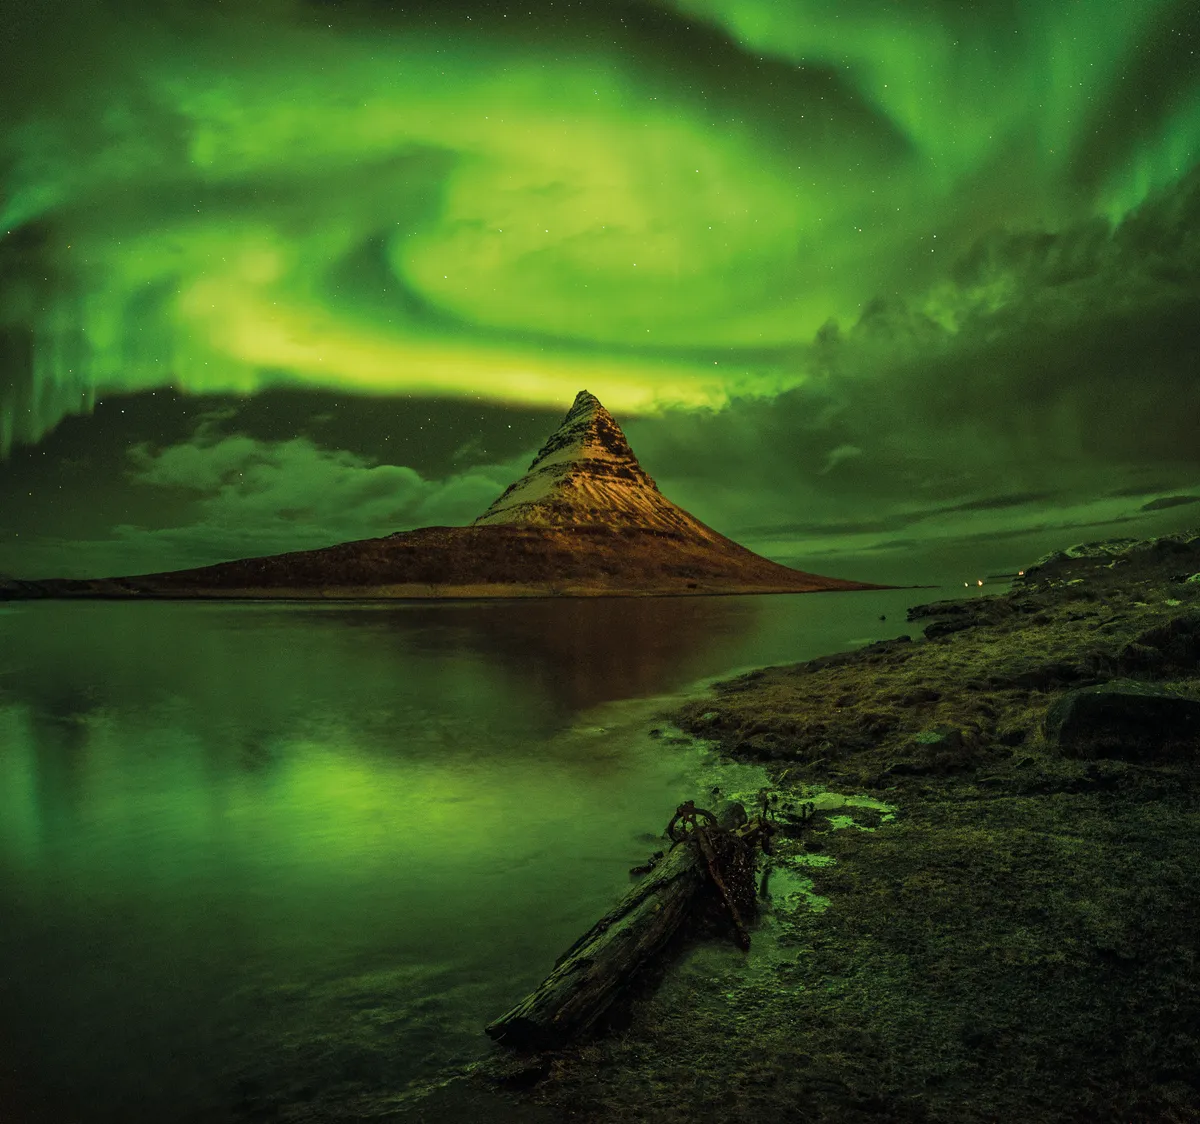 A dragon and the witch’s hat Craig McDearmid, Kirkjufell Mountain, Iceland, 7 December 2018. Equipment: Sony a7S digital camera, Samyang 14mm lens, tripod